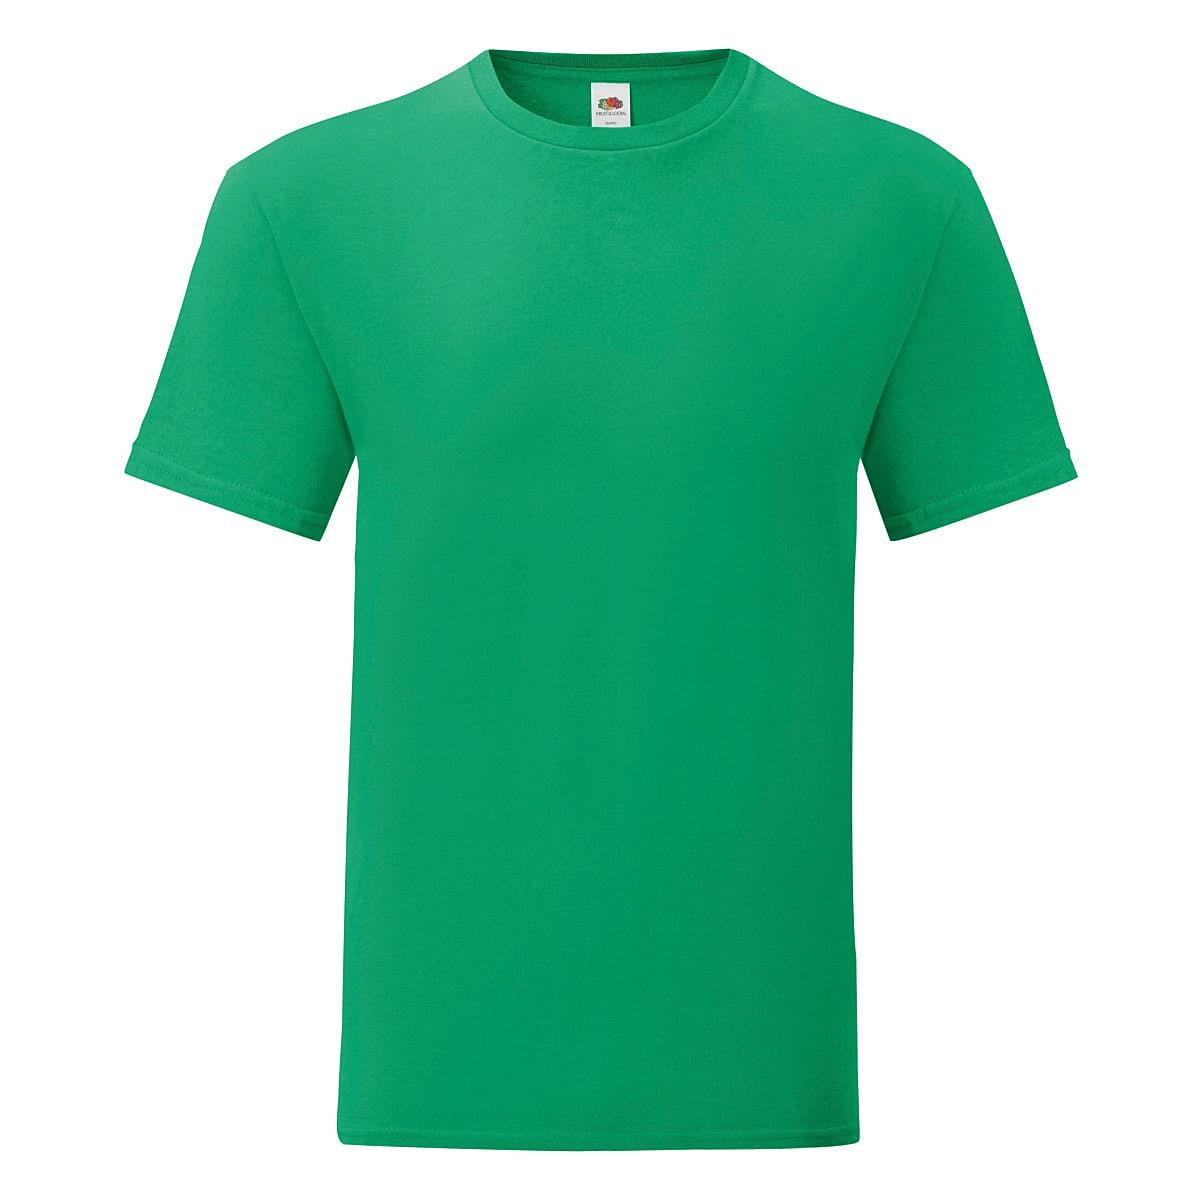 Fruit Of The Loom Mens Iconic T-Shirt in Kelly Green (Product Code: 61430)